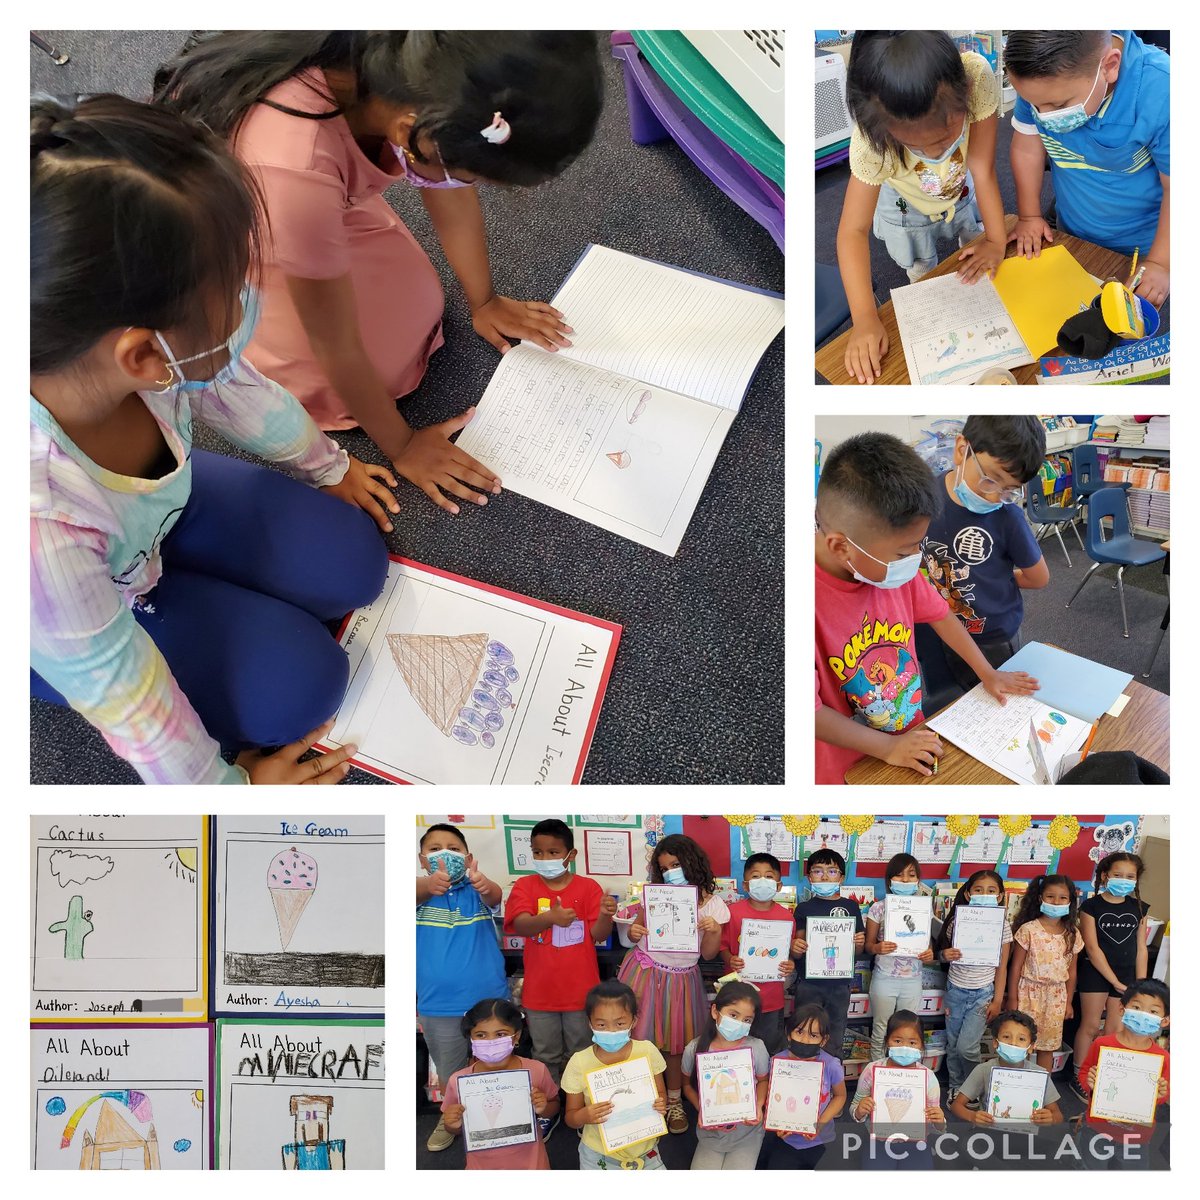 We are writers!! First graders worked hard on their informational books and were so excited to share them during our book celebration! Way to go!! 👏👏